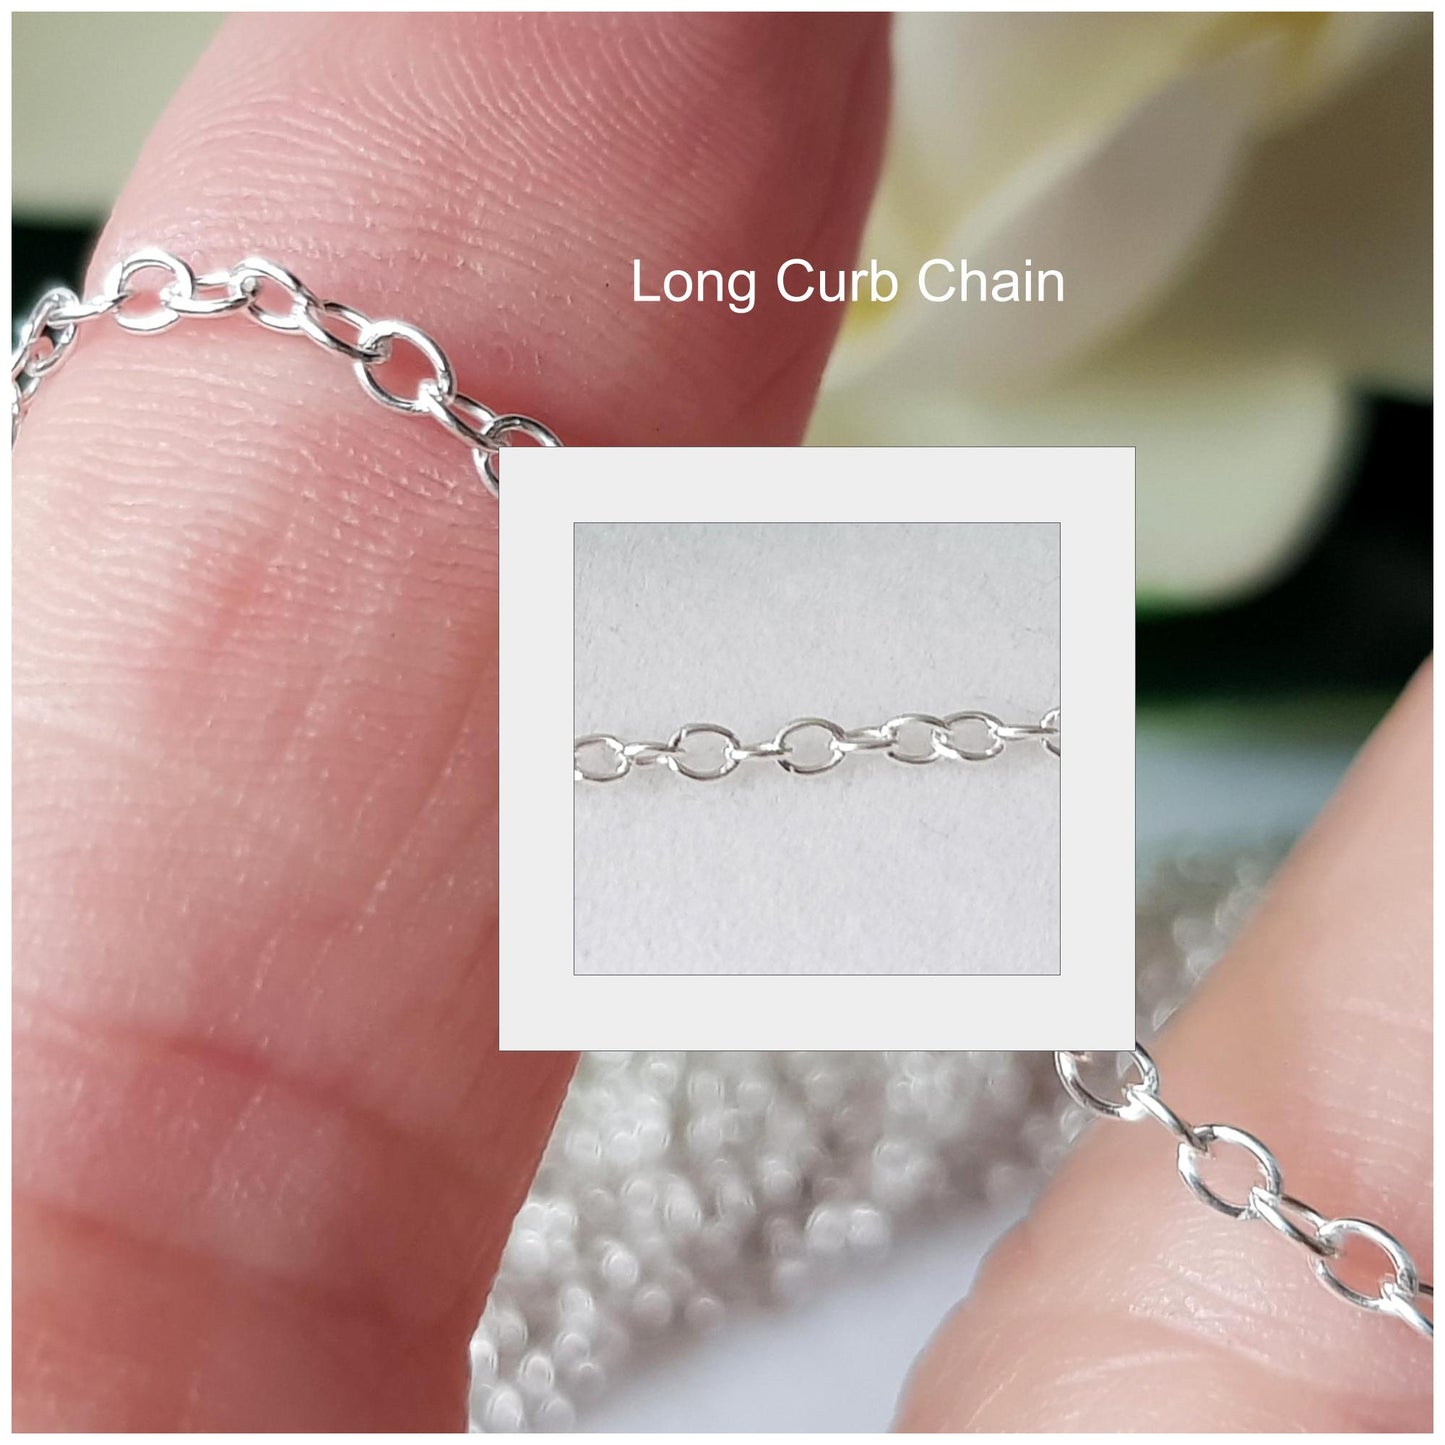 How to Prevent Jewelry Chain from Tangling, Jewelry Making Chains Supplies  Wholesaler